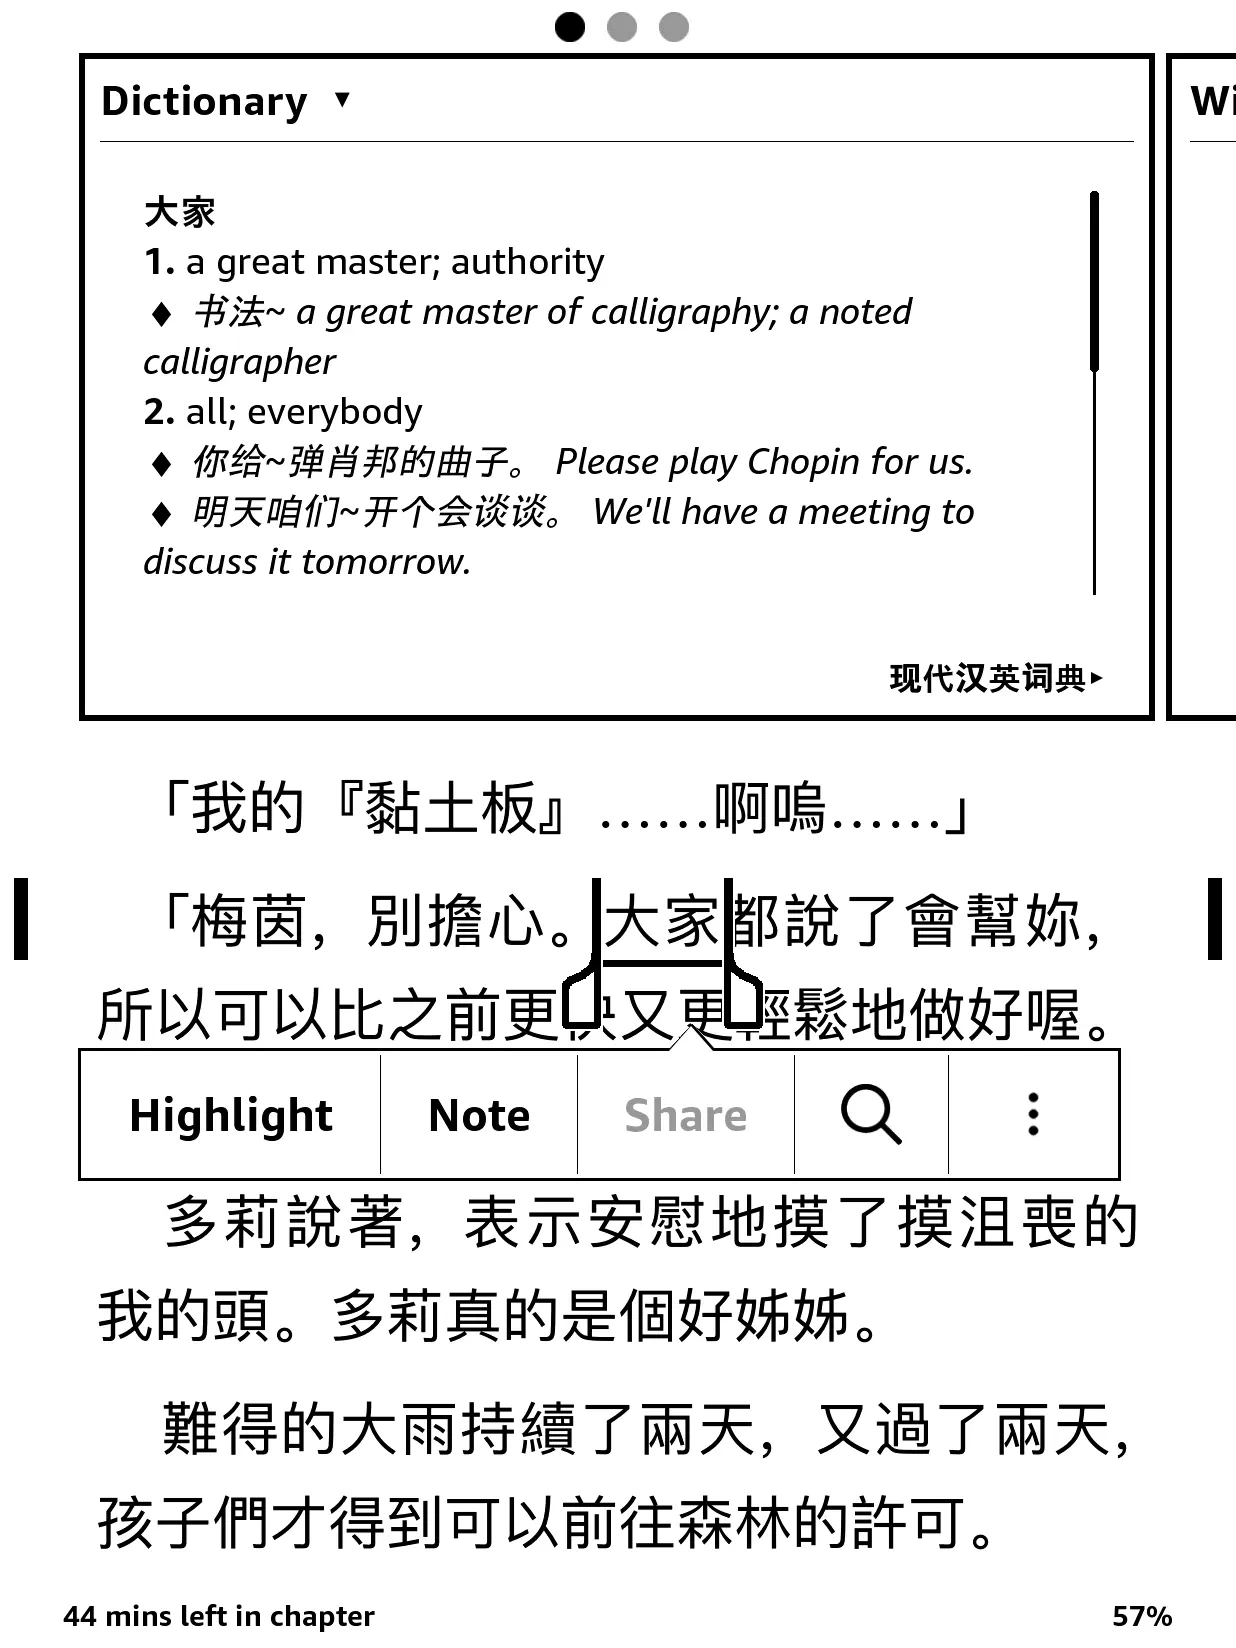 built-in chinese dictionary pop-up